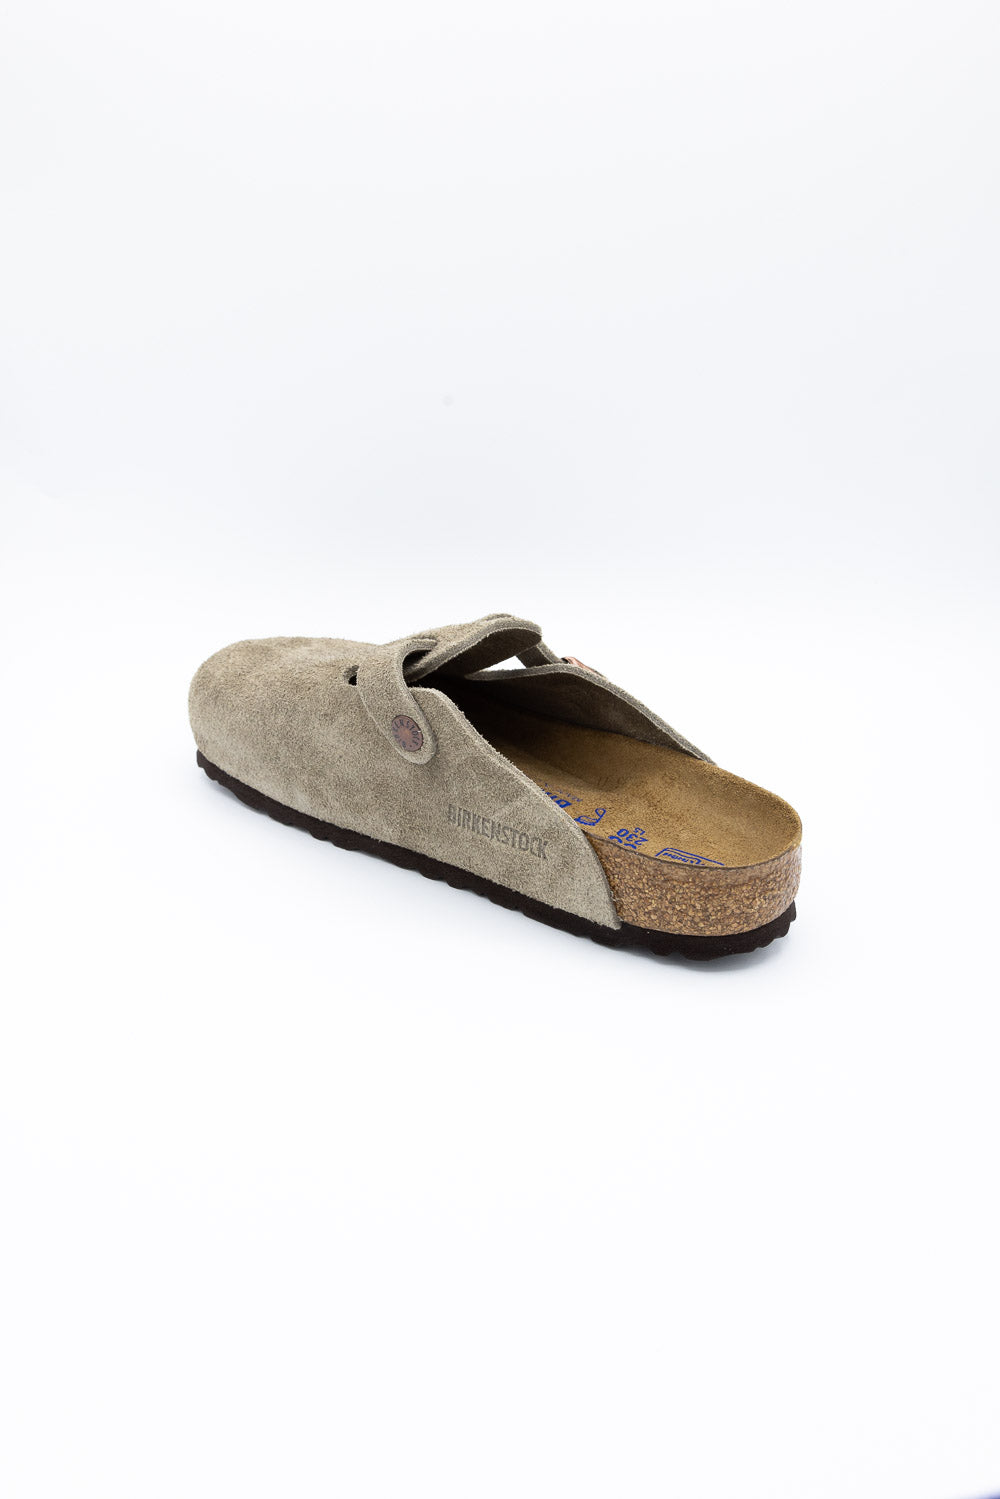 Birkenstock Boston Soft Footbed Suede Leather Clogs for Women in